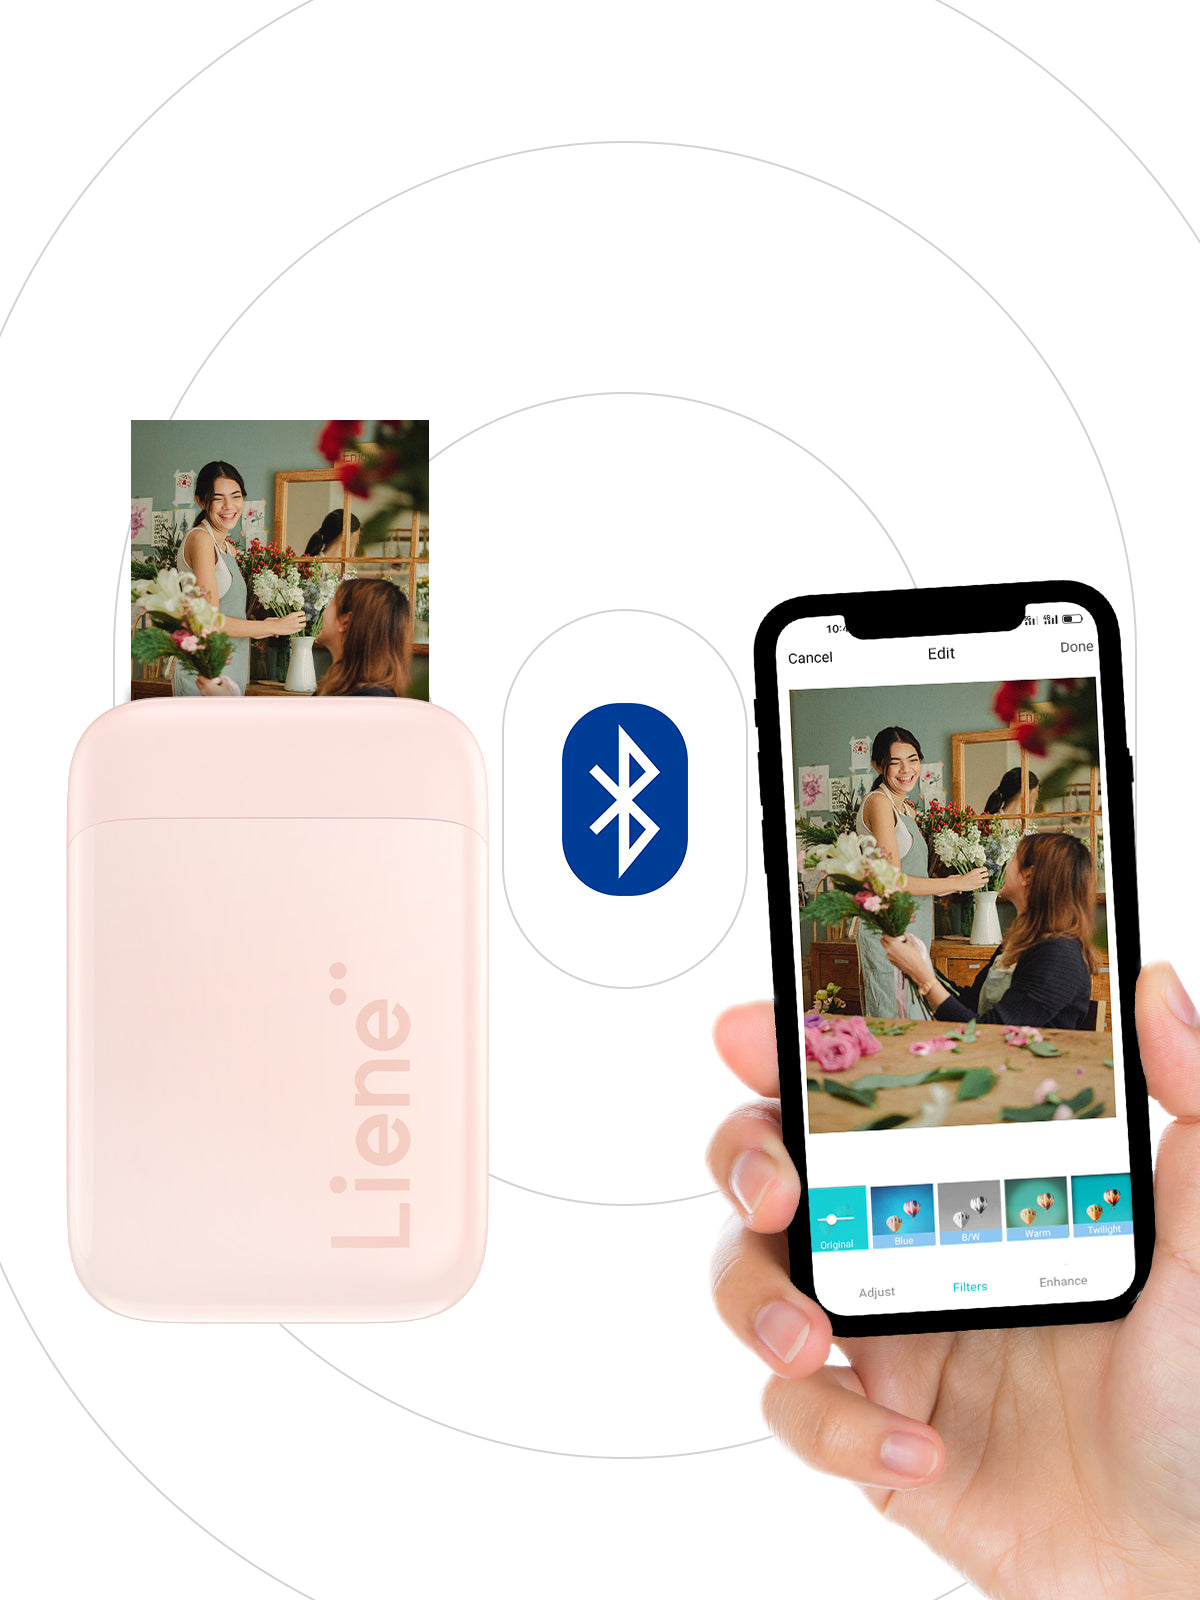 Liene Pearl photo printer enables fast printing by connecting to Bluetooth 5.0